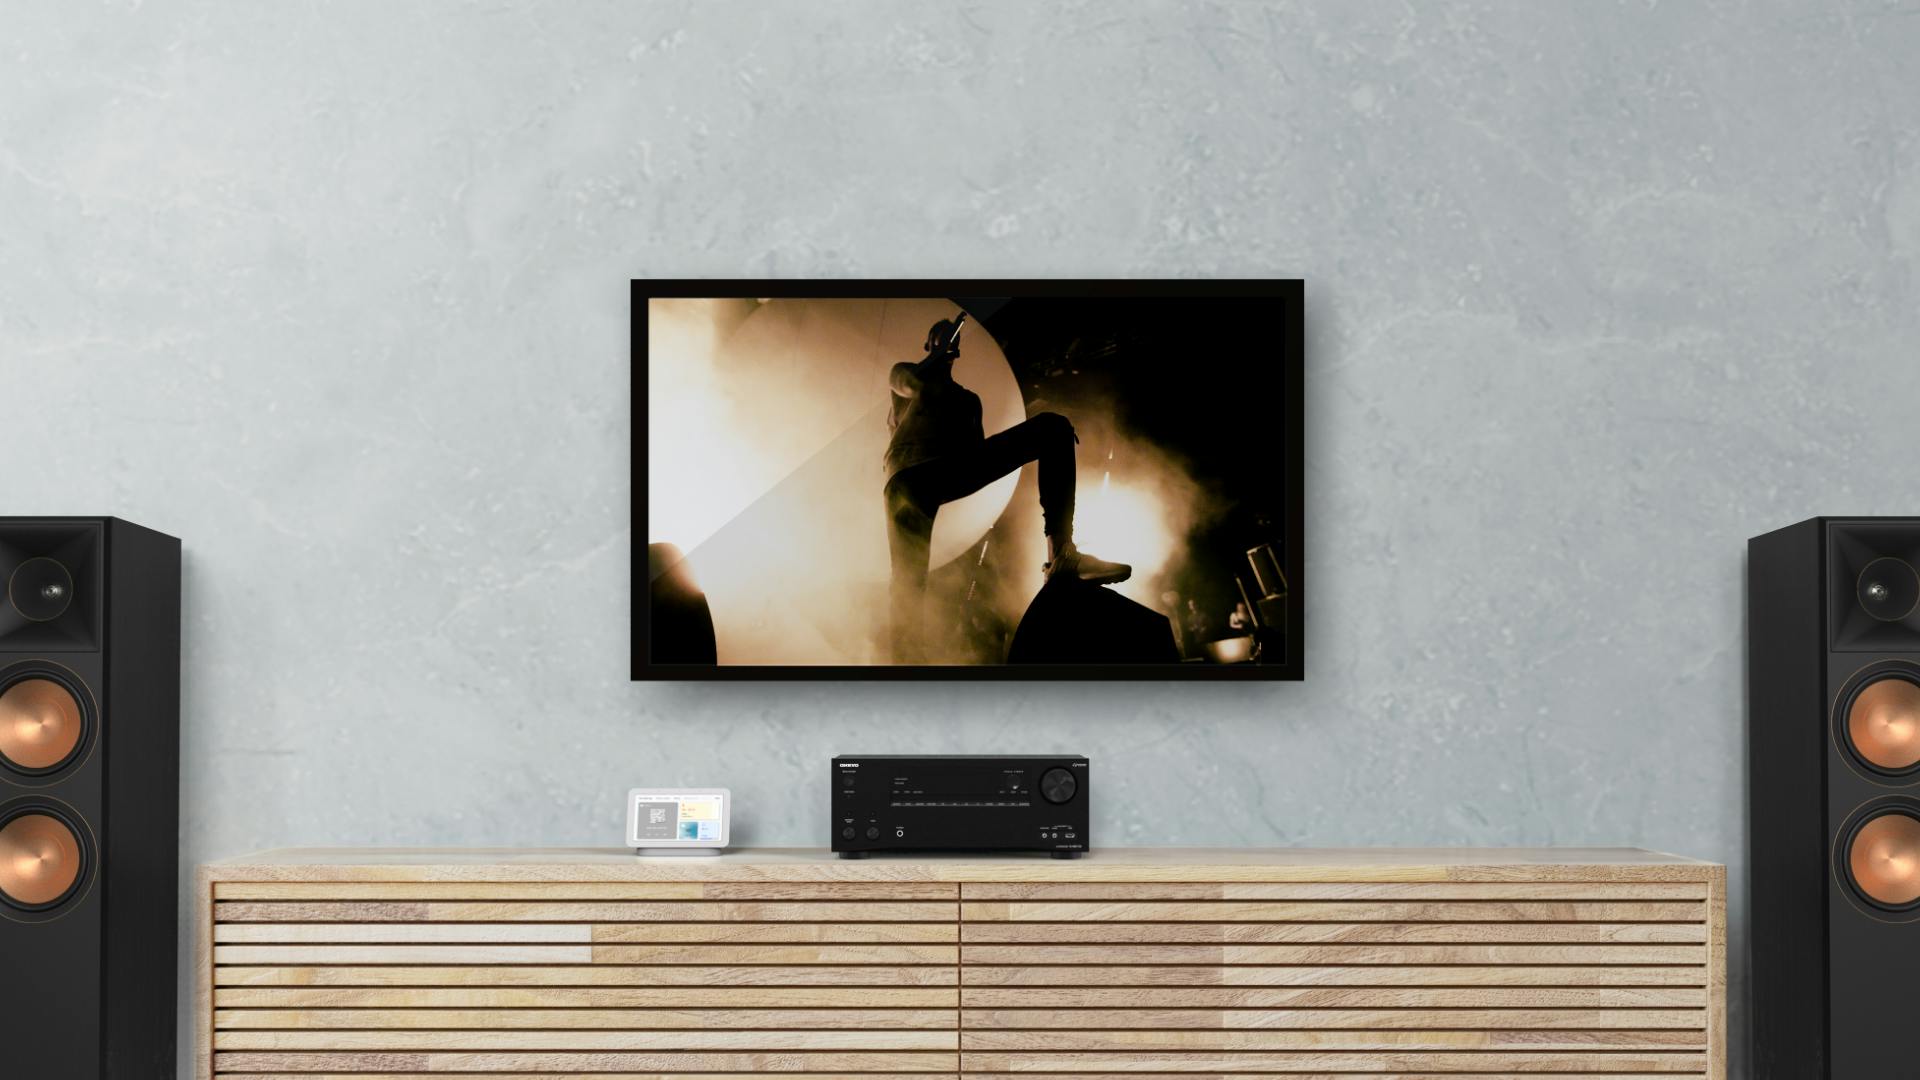 Onkyo 7100 RP8060 FA Beside TV Showing Concert